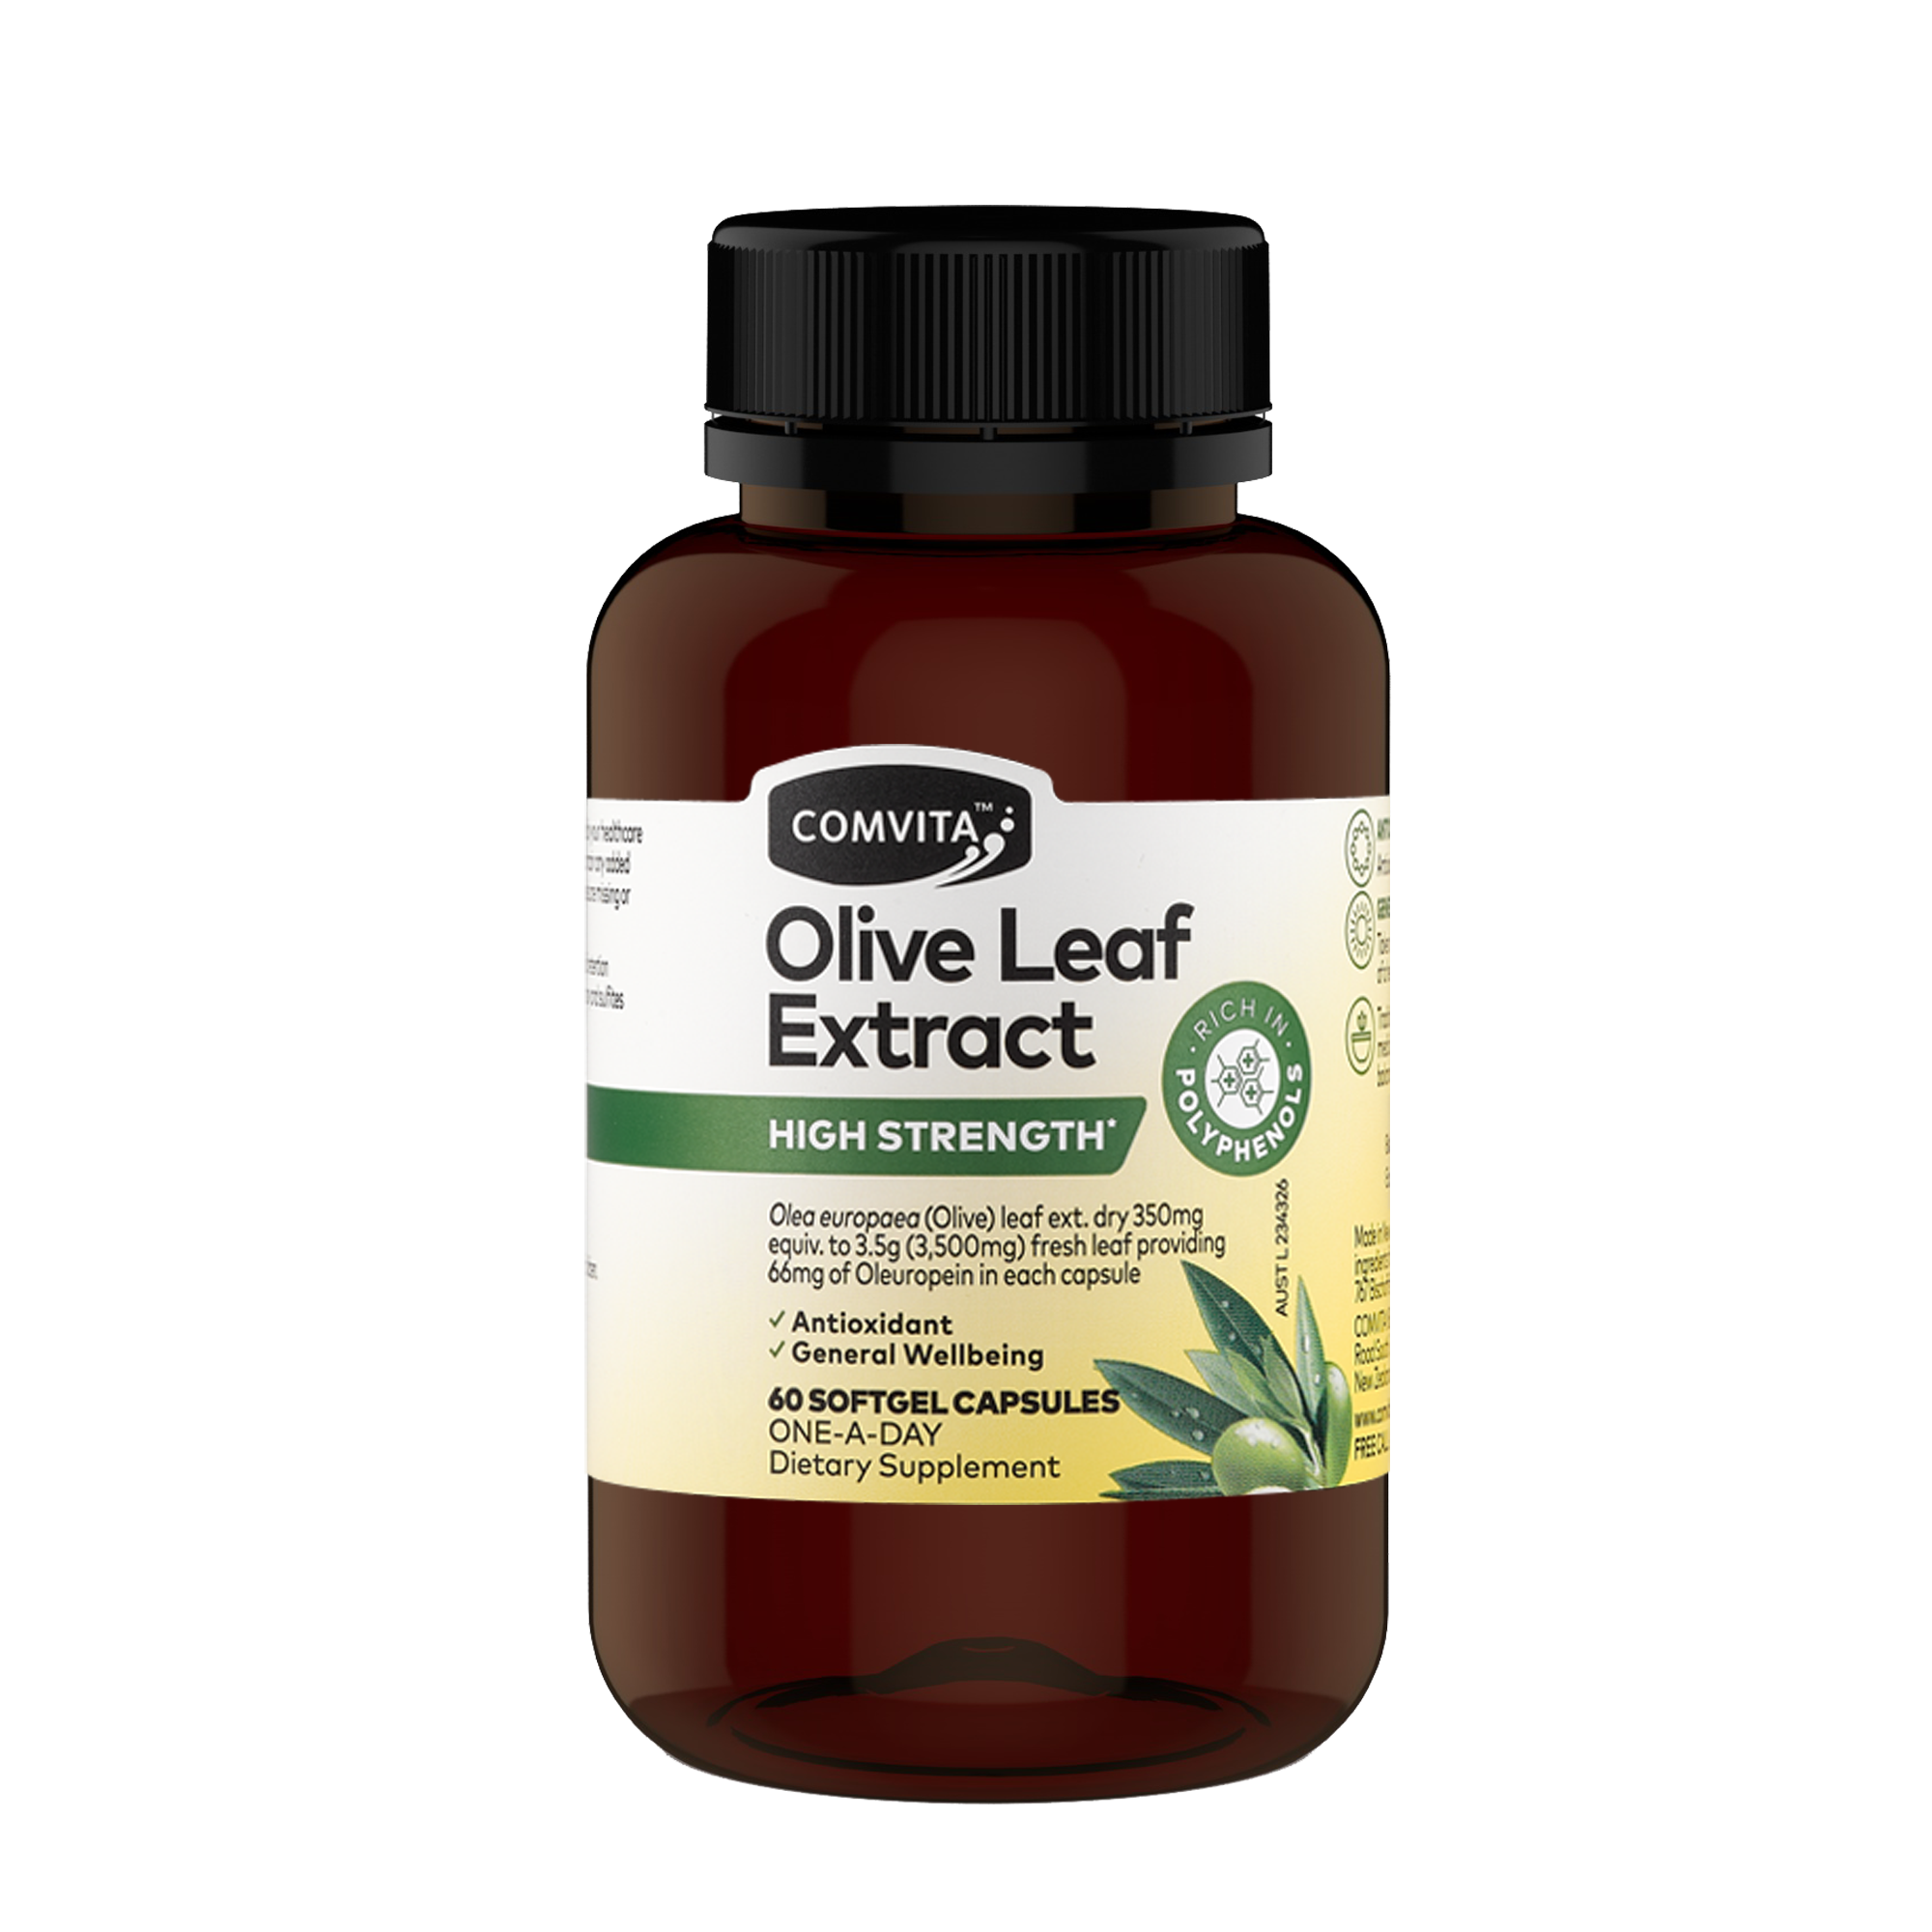 Olive Leaf Extract High Strength Capsules 60s bottle front